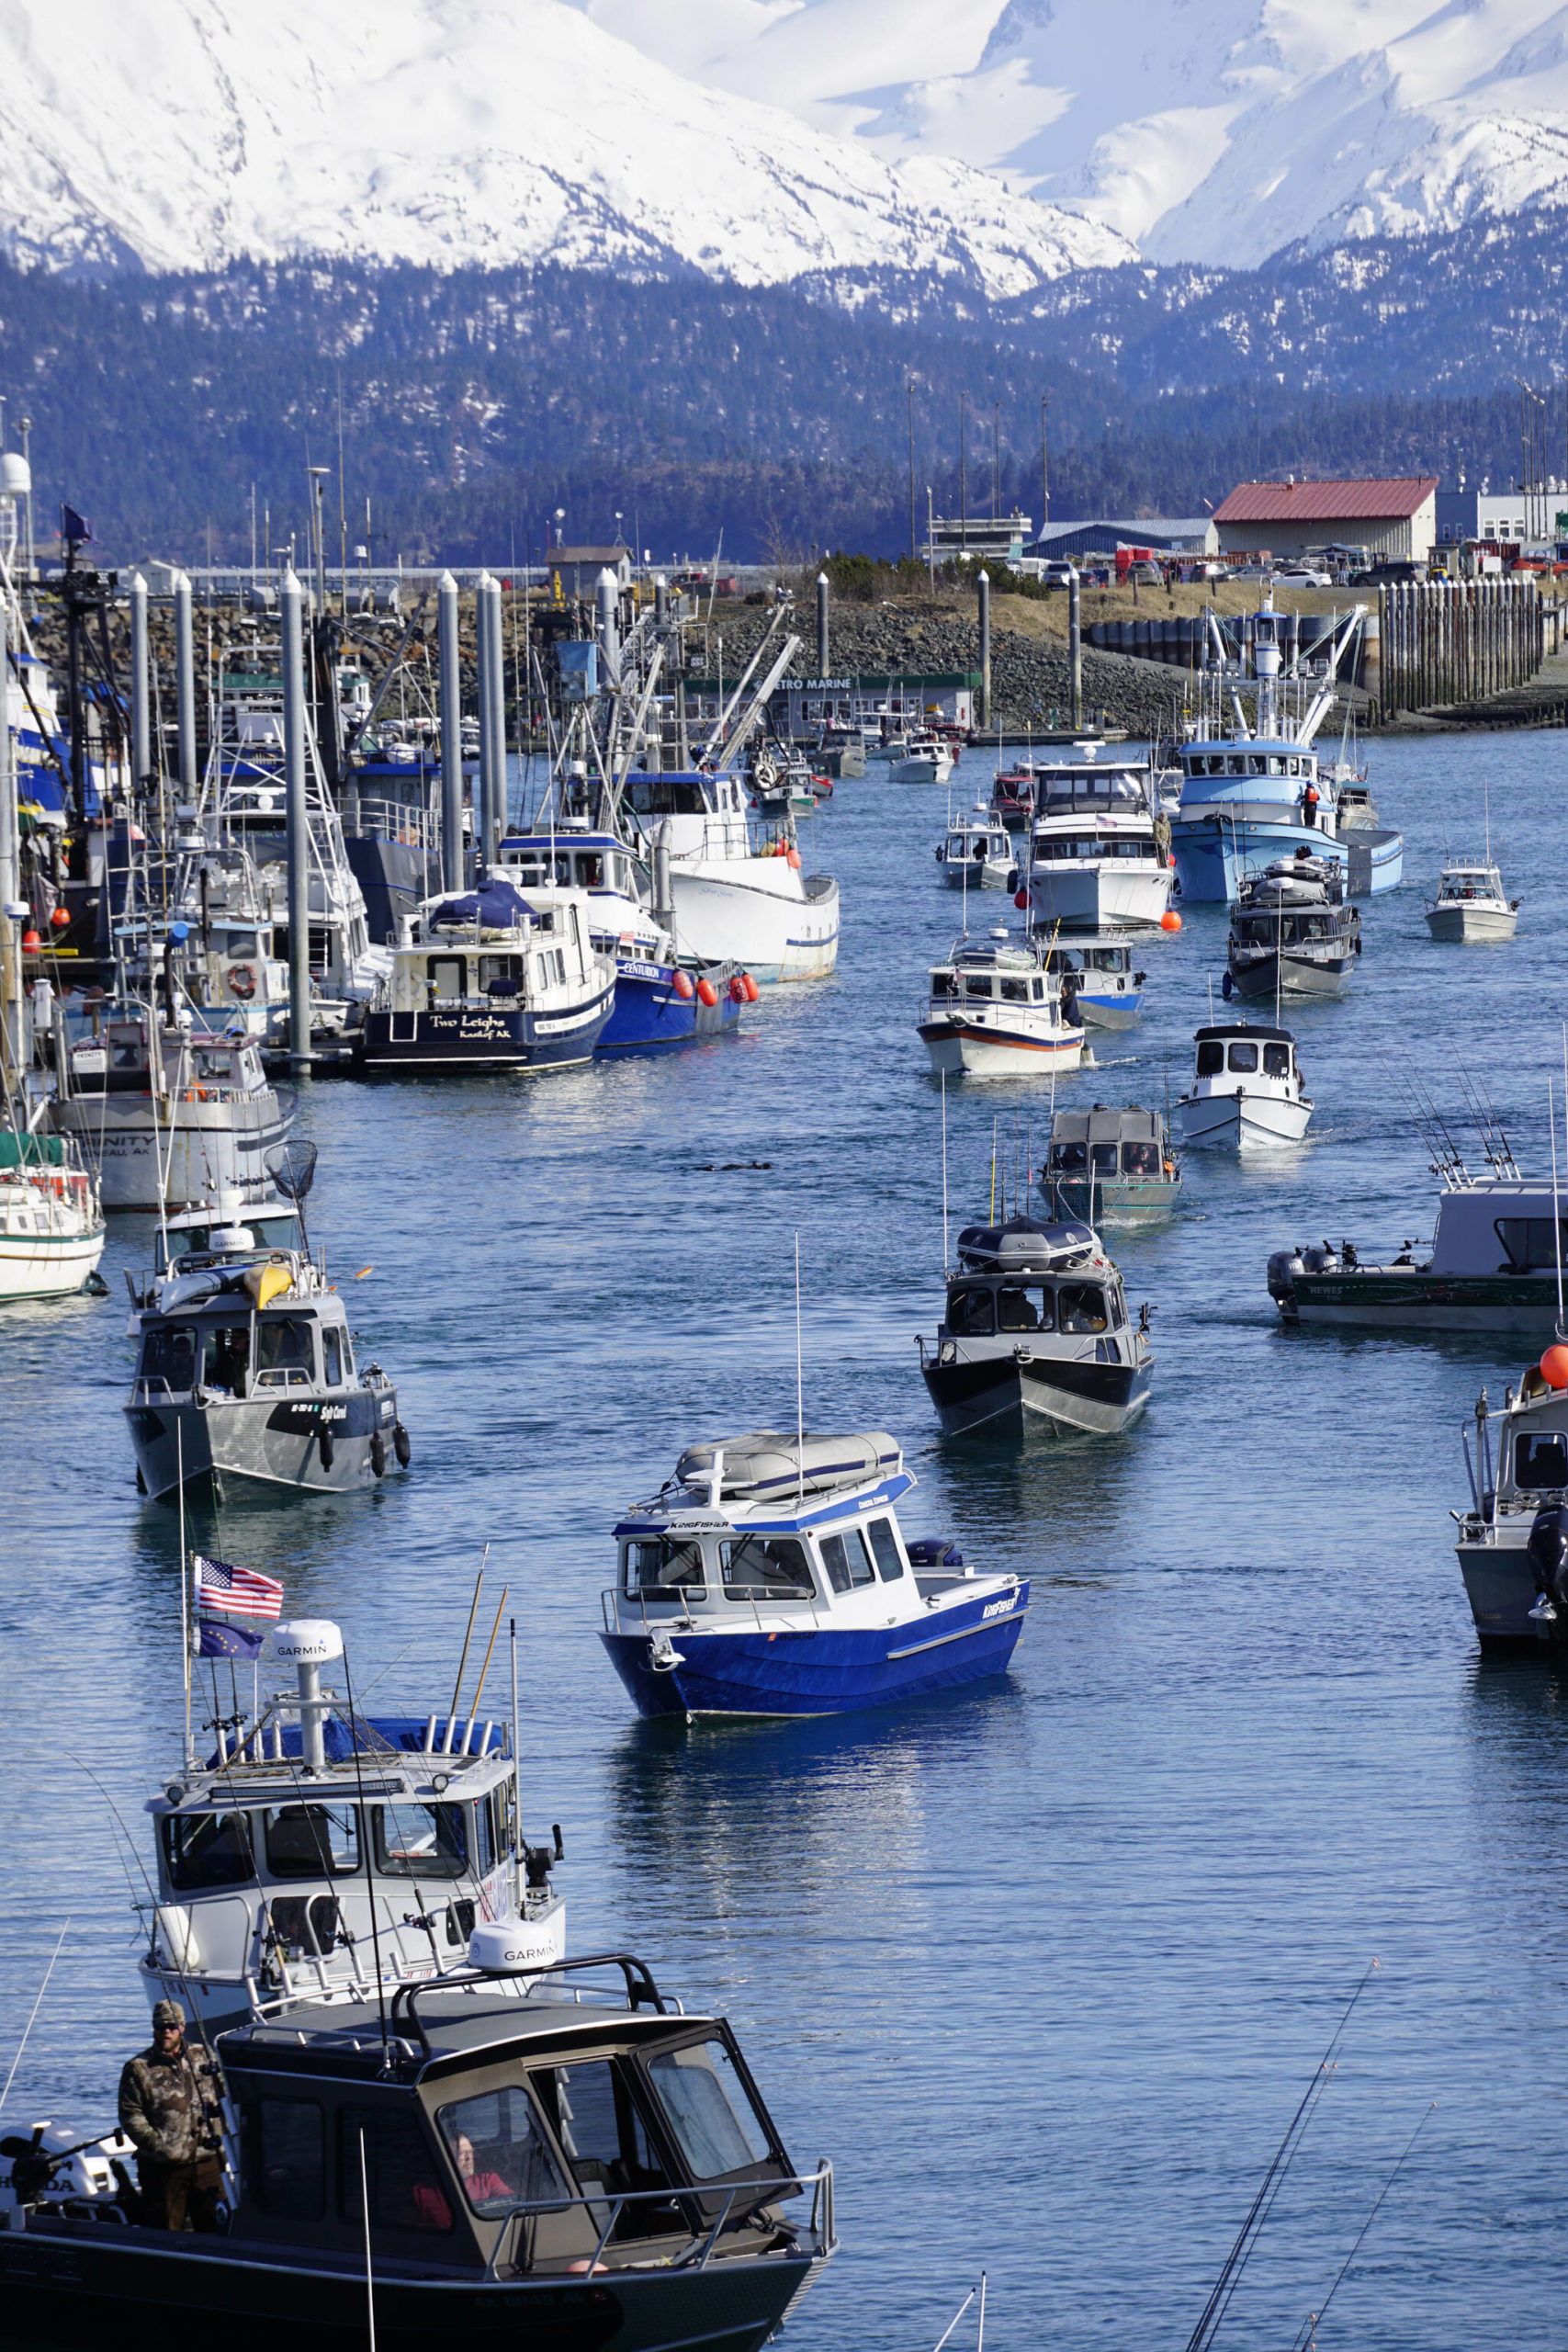 Fishing boats return to the harbor during the 28th annual Homer Winter King Salmon Tournament on Sunday, April 10, 2022, in Kachemak Bay, Homer, Alaska. (Photo by Michael Armstrong/Homer News)